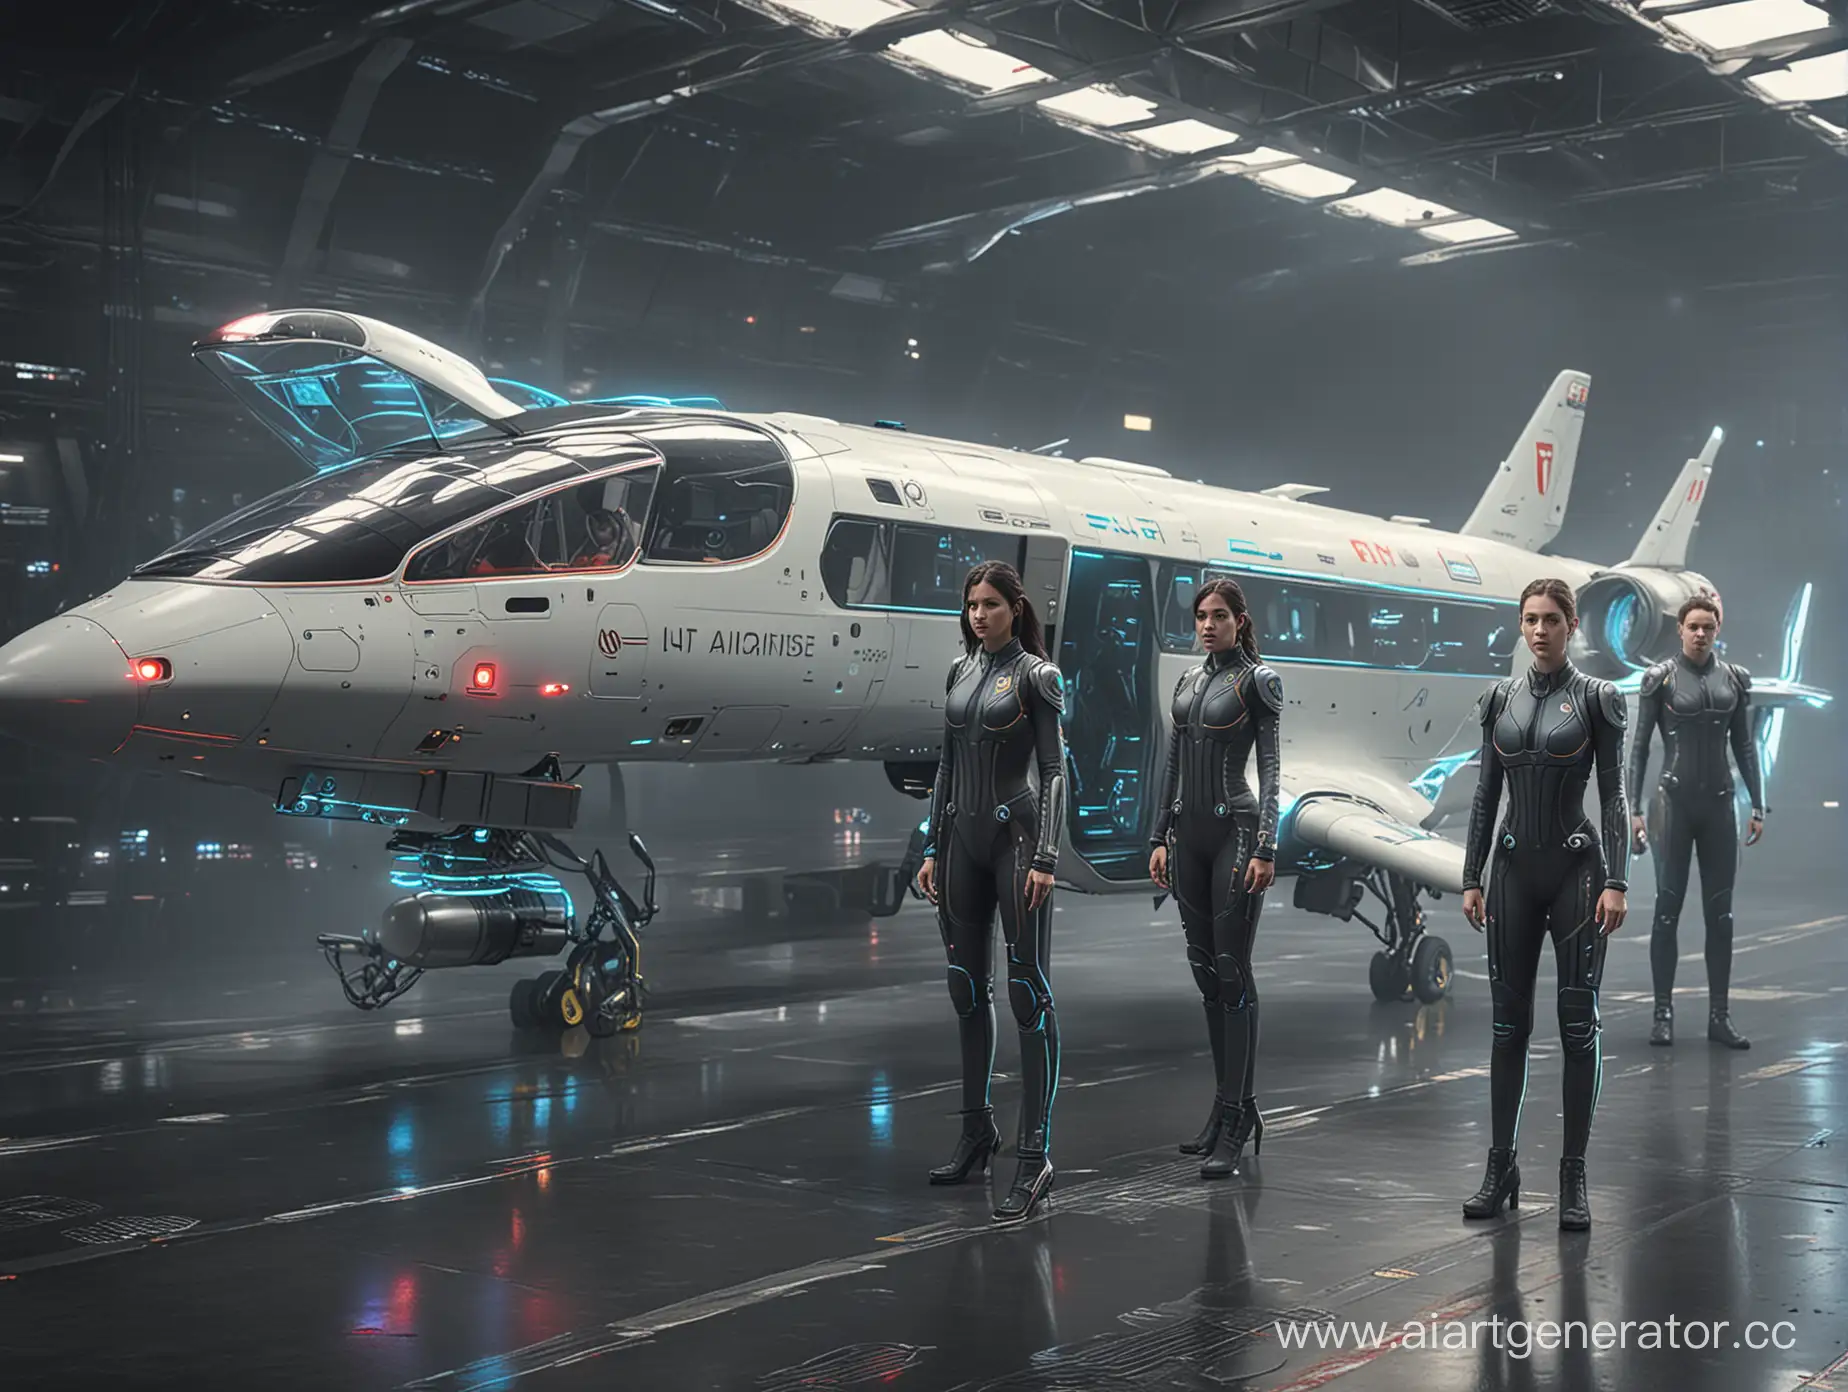 Futuristic-Airplane-Crew-Surrounded-by-Alien-Technologies-and-Holograms